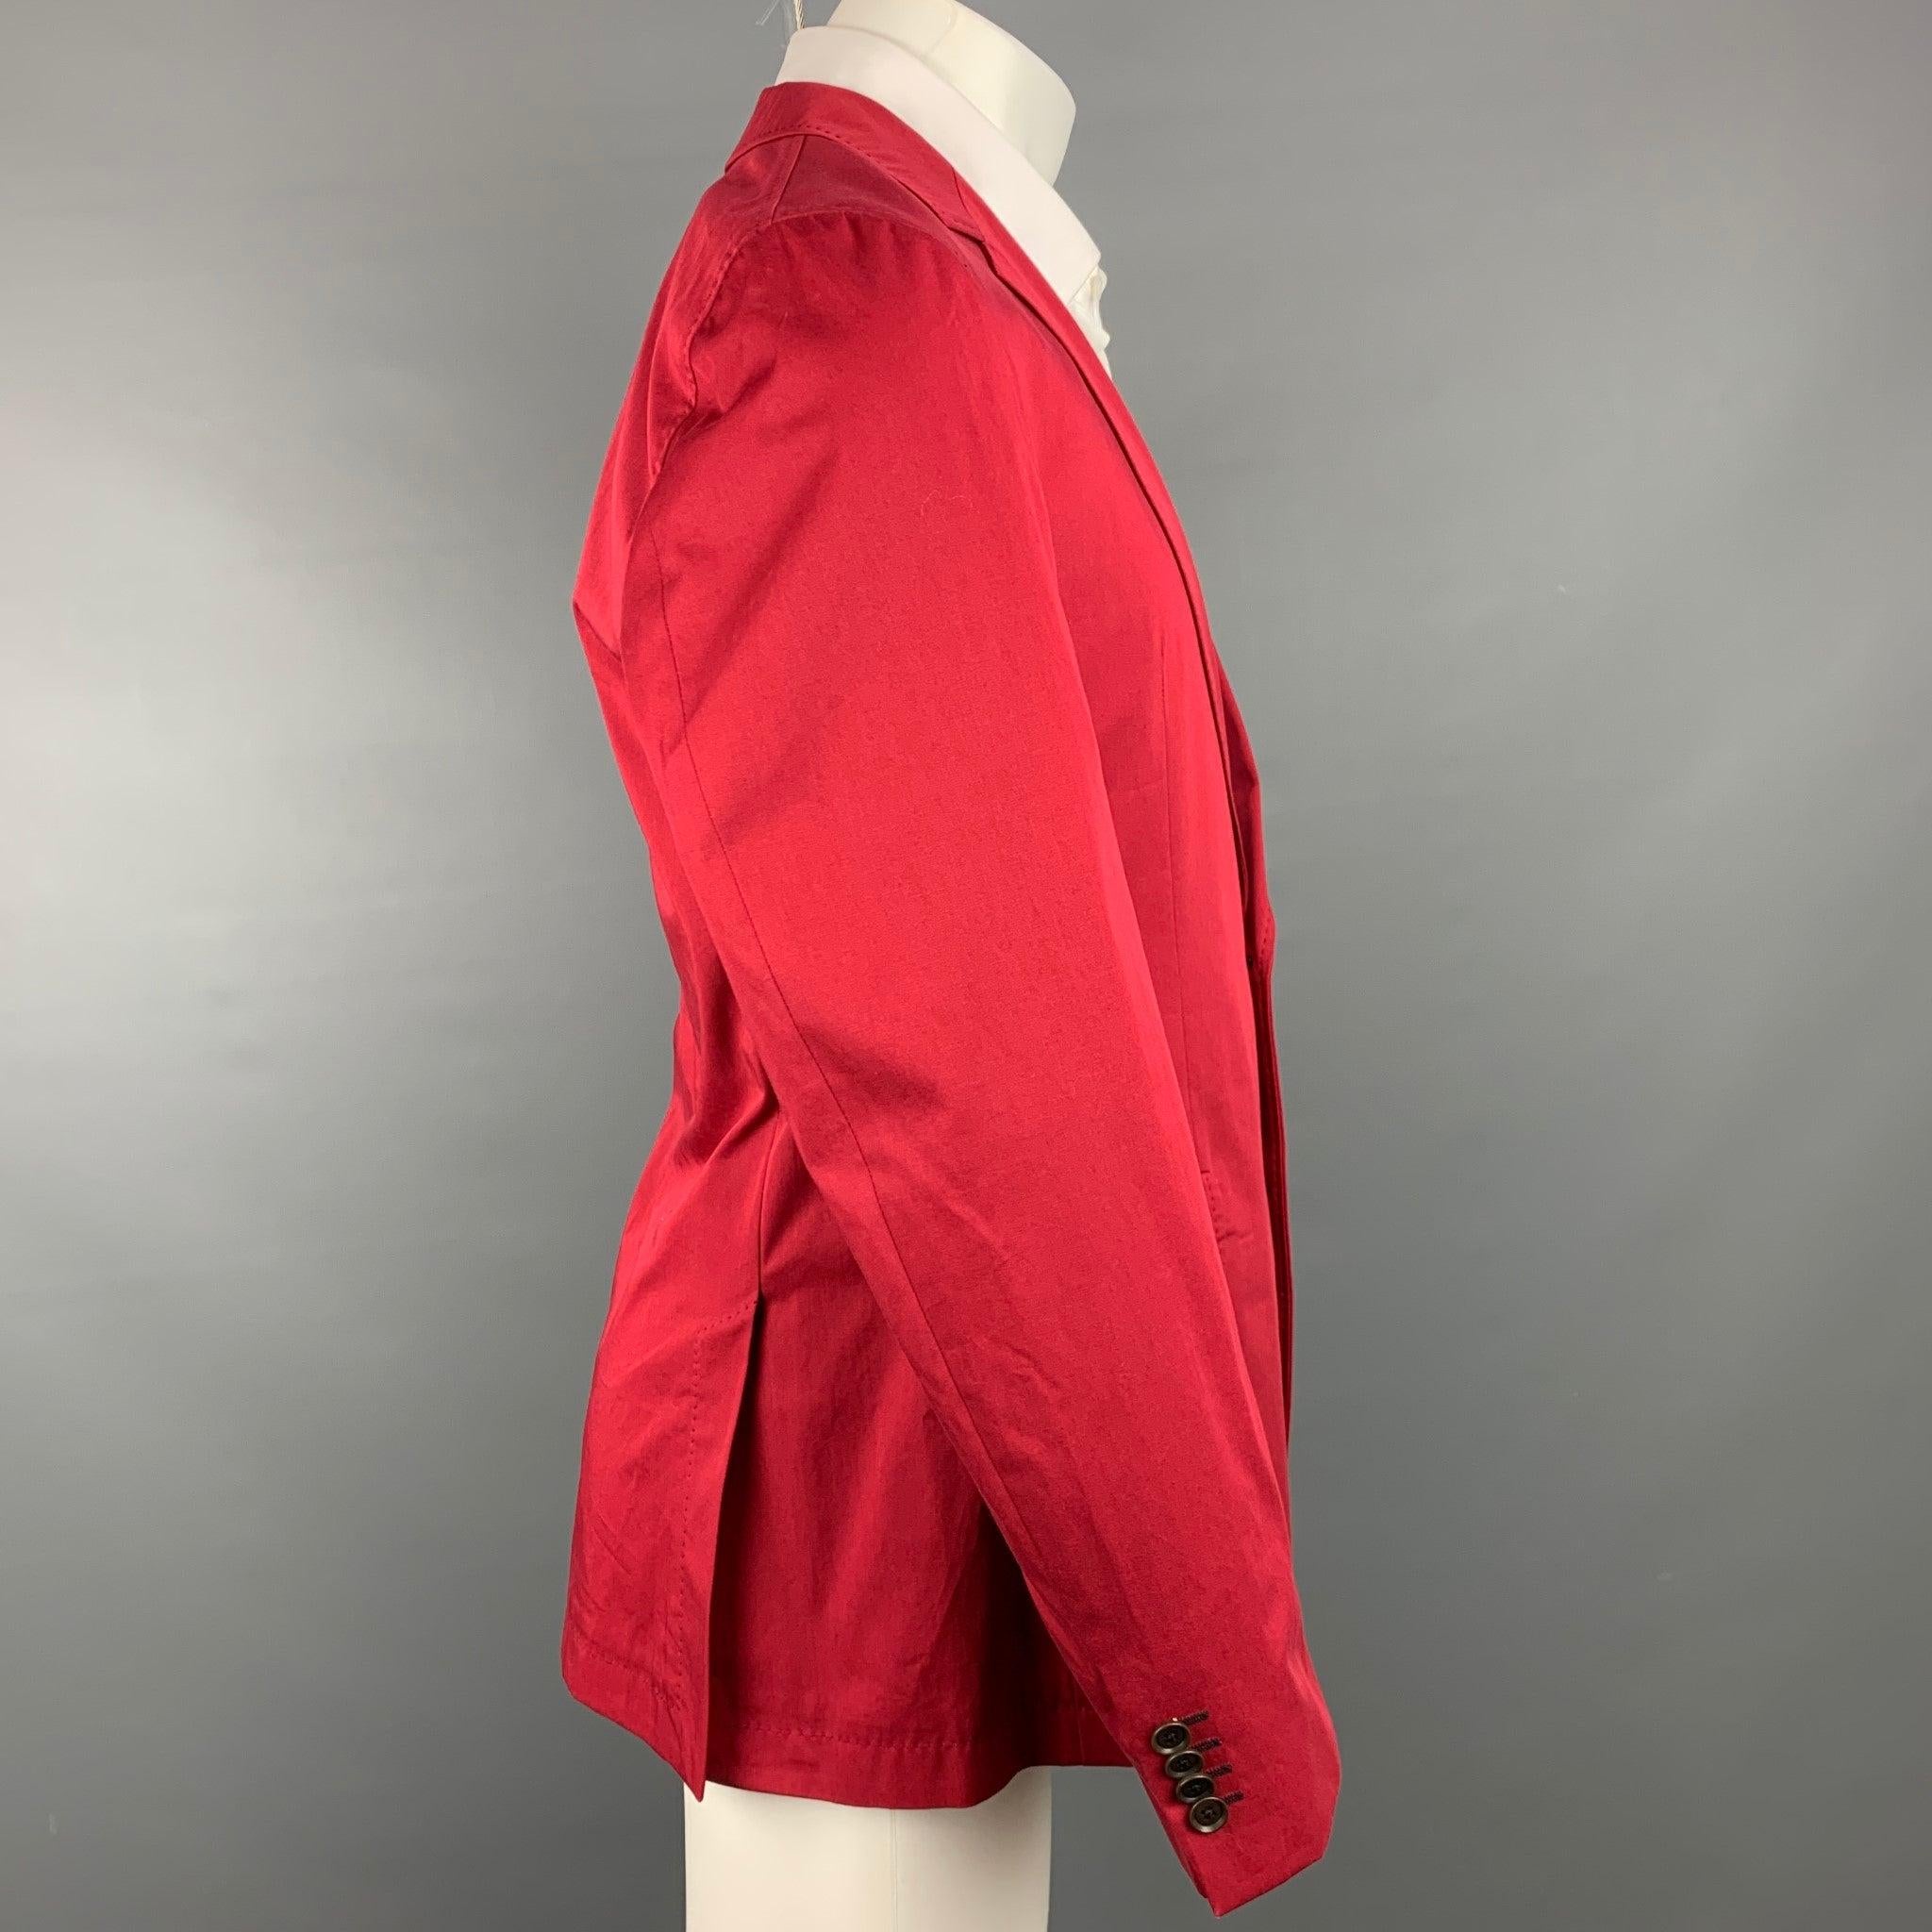 HUGO BOOS
sport coat comes in a red cotton with a half liner featuring a notch lapel, flap pockets, top stitching, and a two button closure.Very Good Pre-Owned Condition.  

Marked:   US 40 

Measurements: 
 
Shoulder:
17.5 inches  Chest: 40 inches 